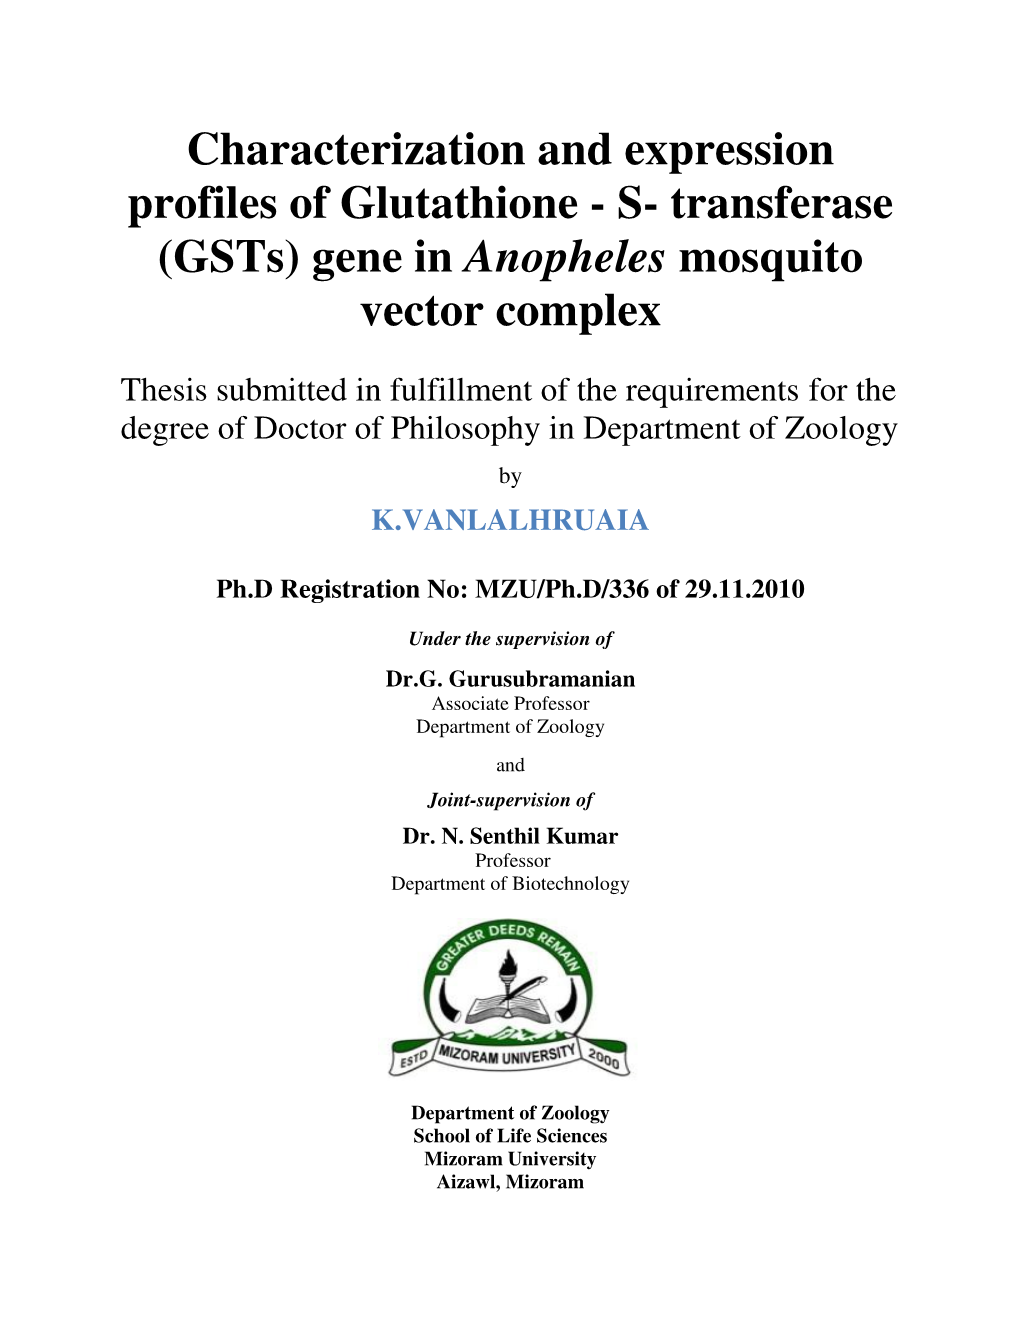 Characterization and Expression Profiles of Glutathione - S- Transferase (Gsts) Gene in Anopheles Mosquito Vector Complex